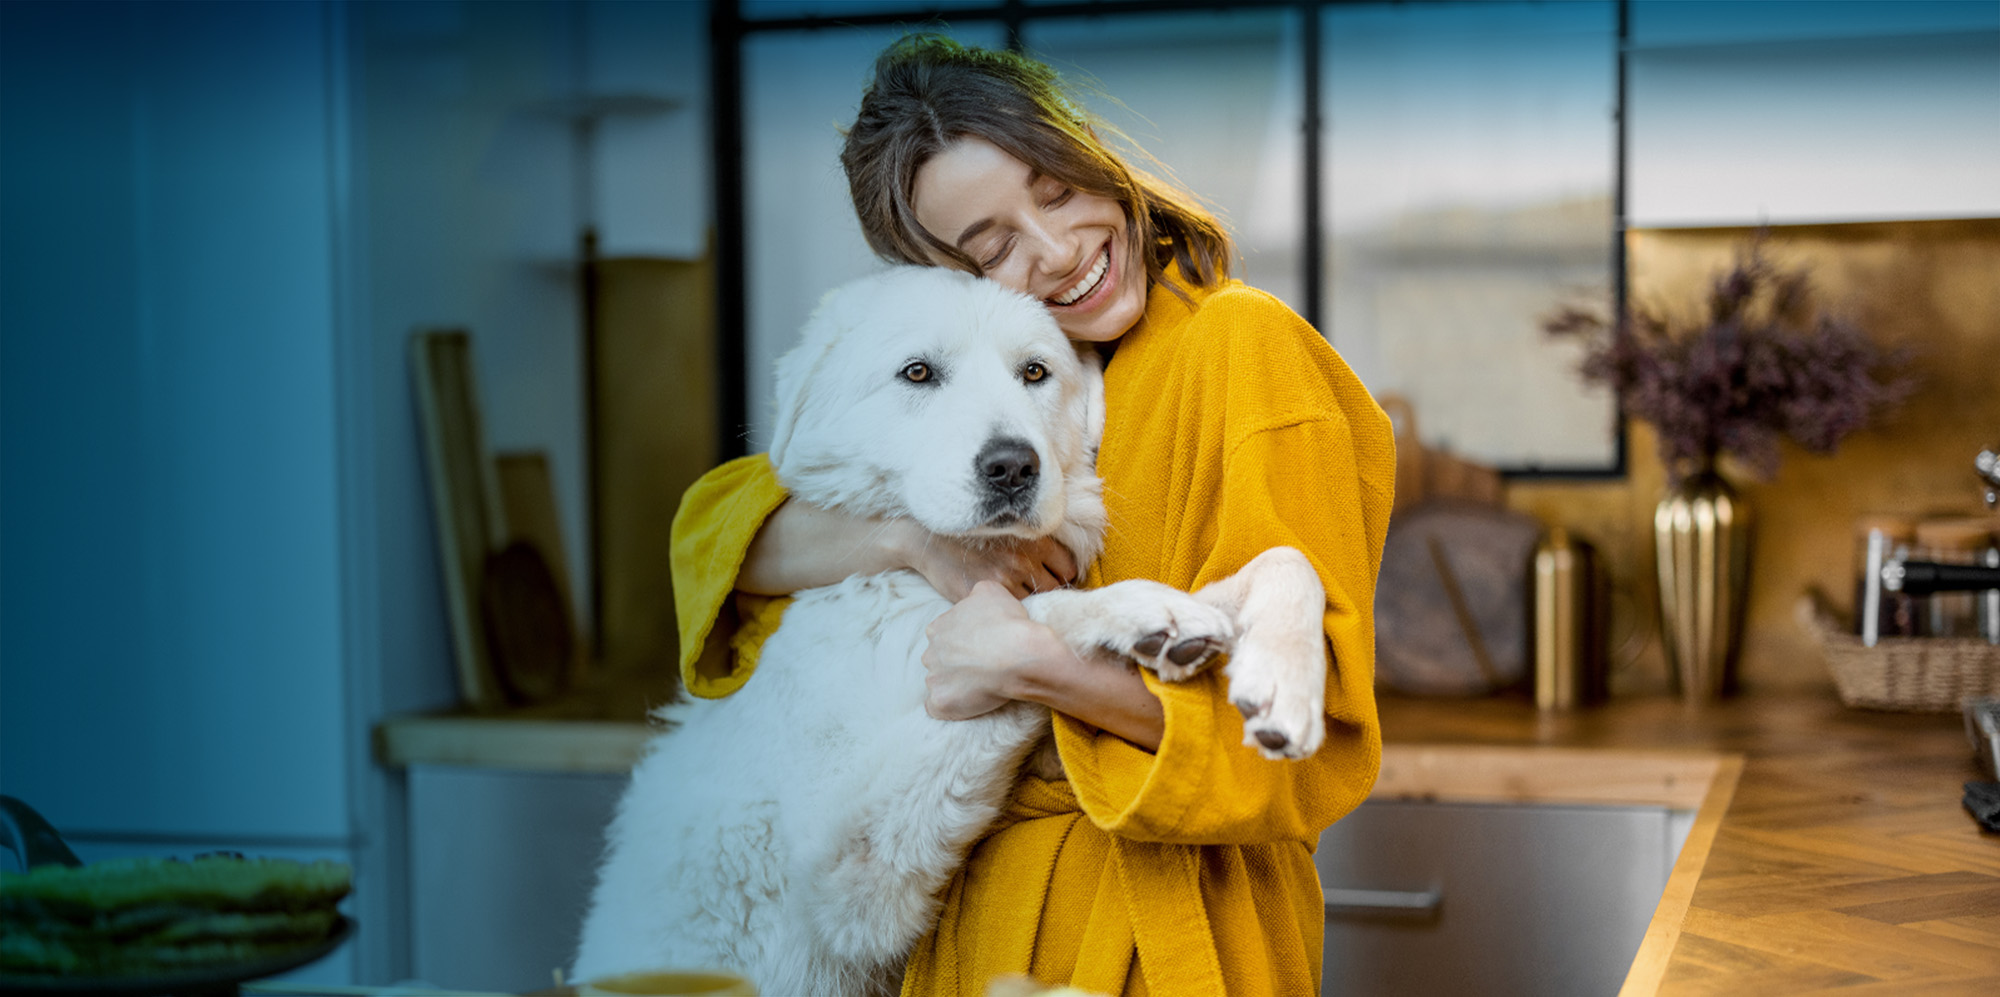 Woman smiling and holding dog in kitchen